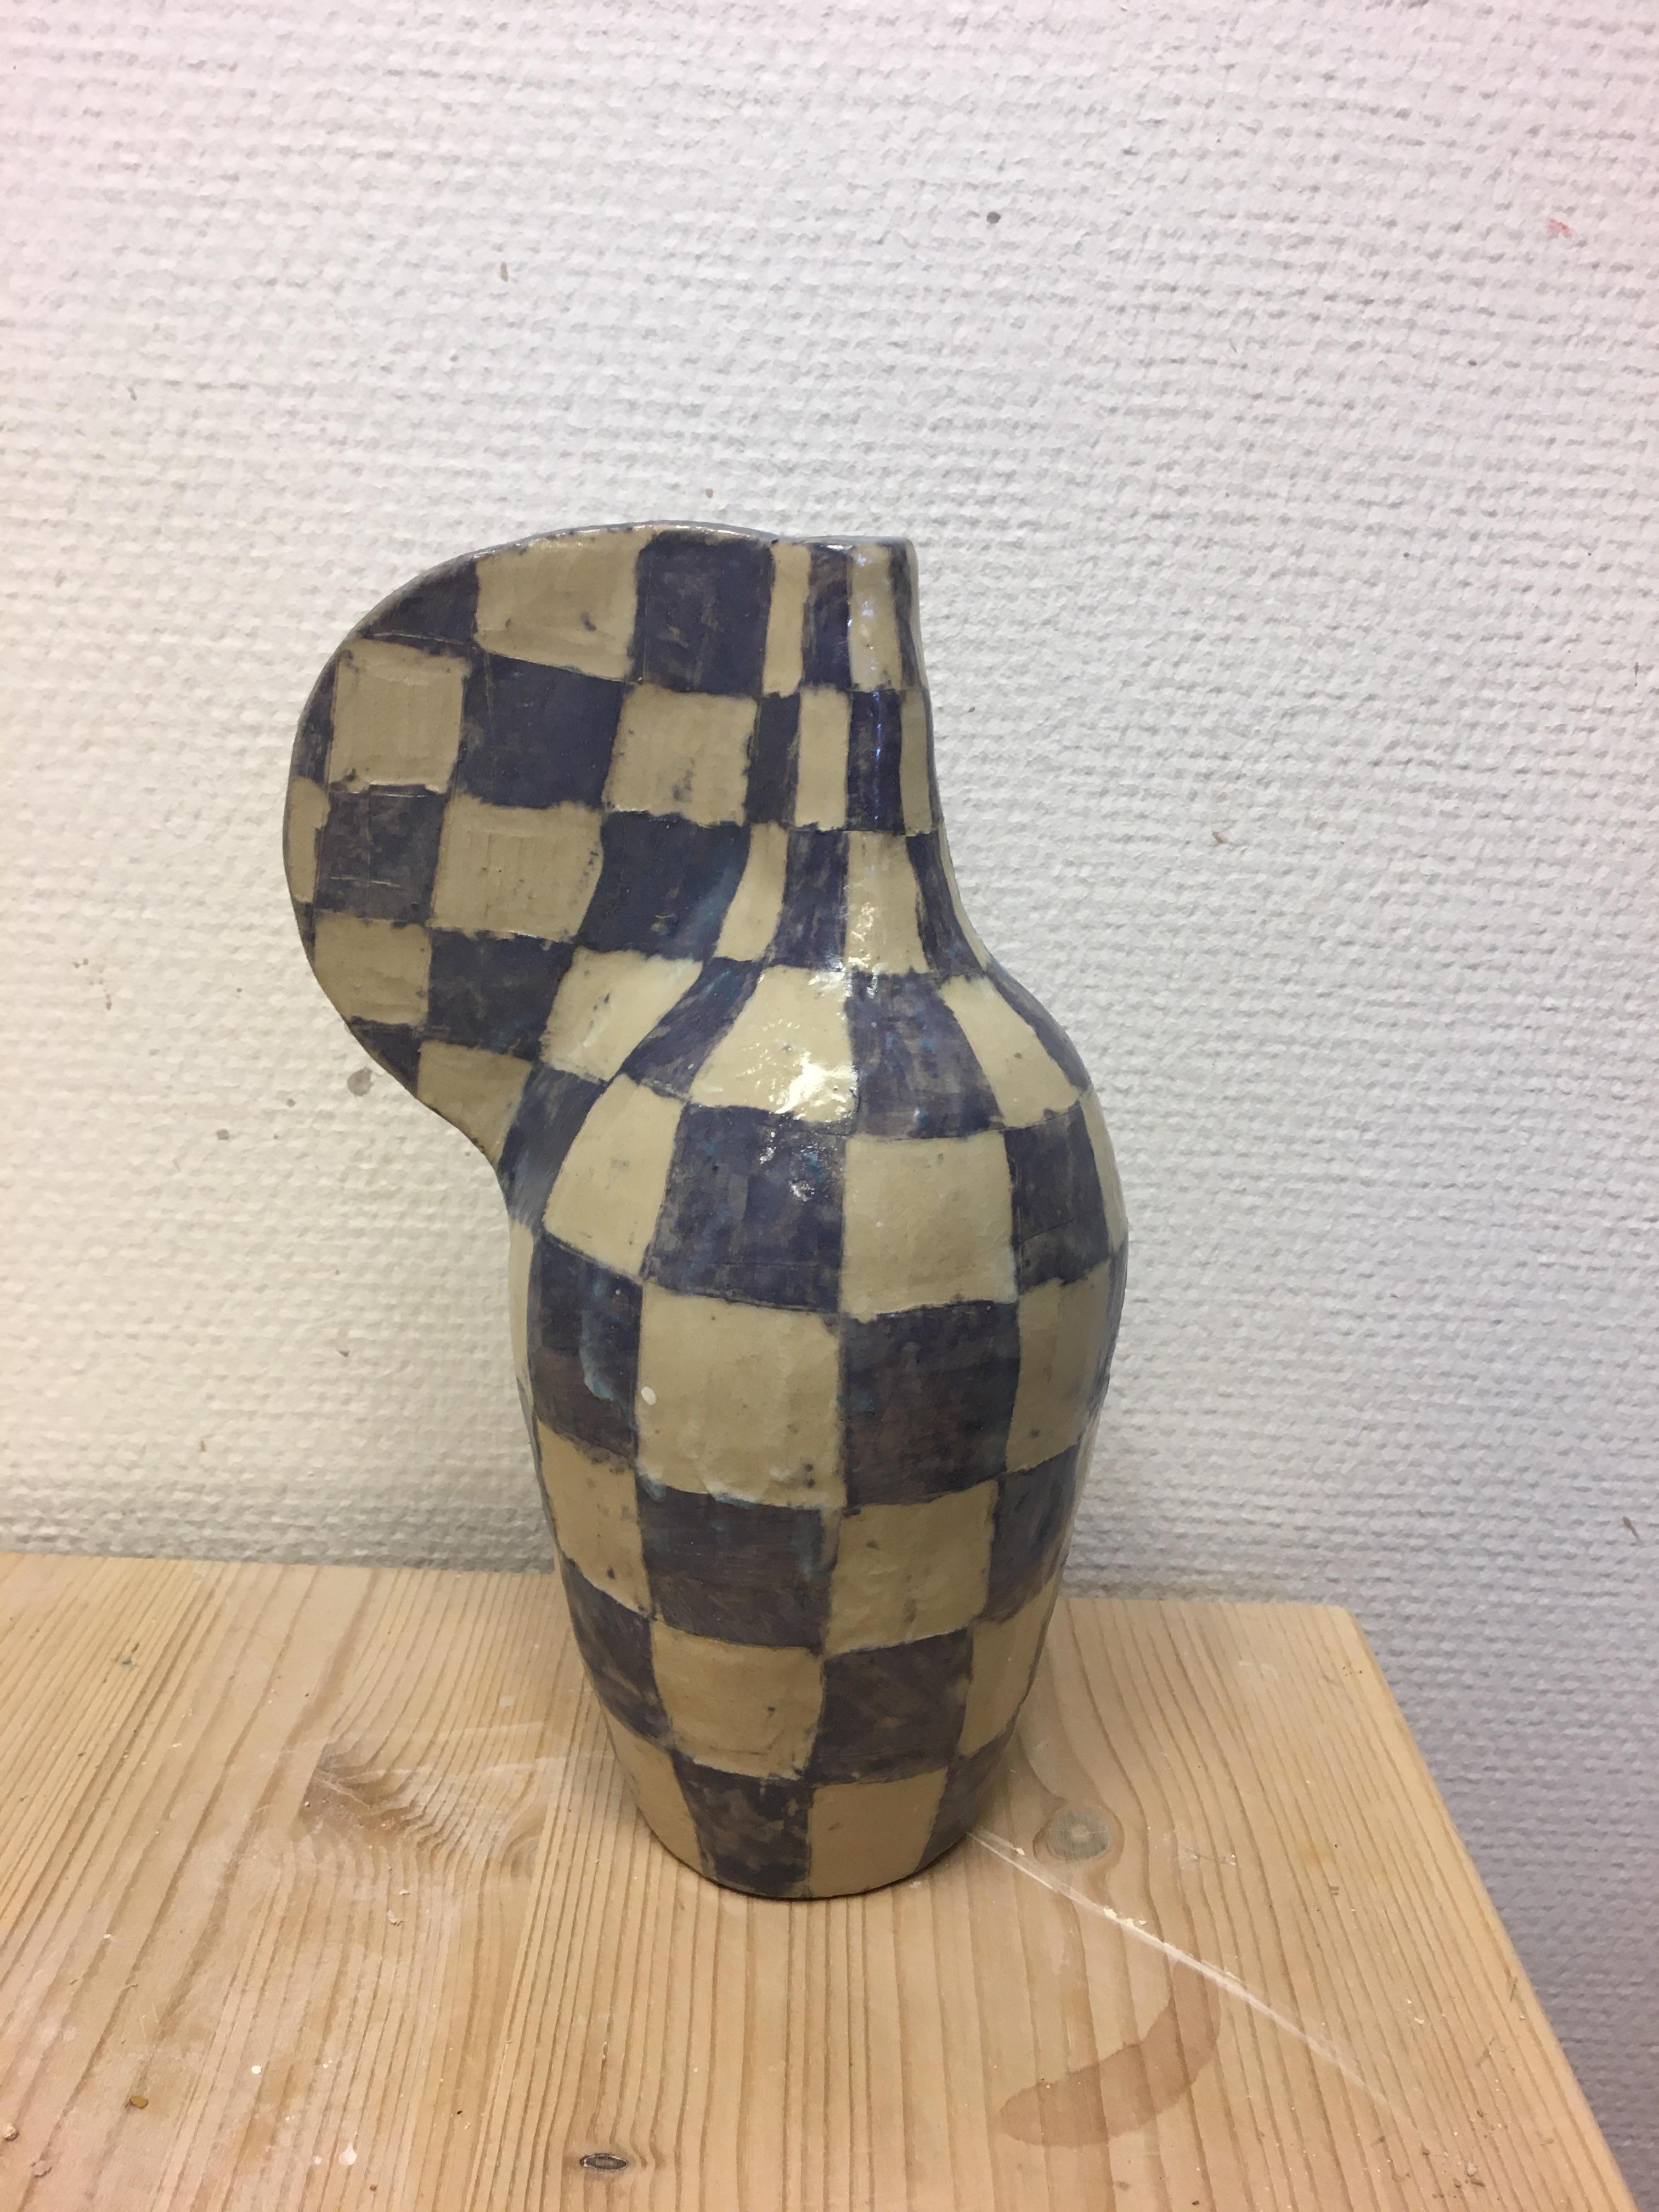 Potion bottle by Maria Lenskjold
Dimensions: H 24 cm
Materials: Stoneware

Maria Lenskjold’s practice is based on a consistent principle; to investigate and interact with the common pictorial artistic categories and challenge them in playful and